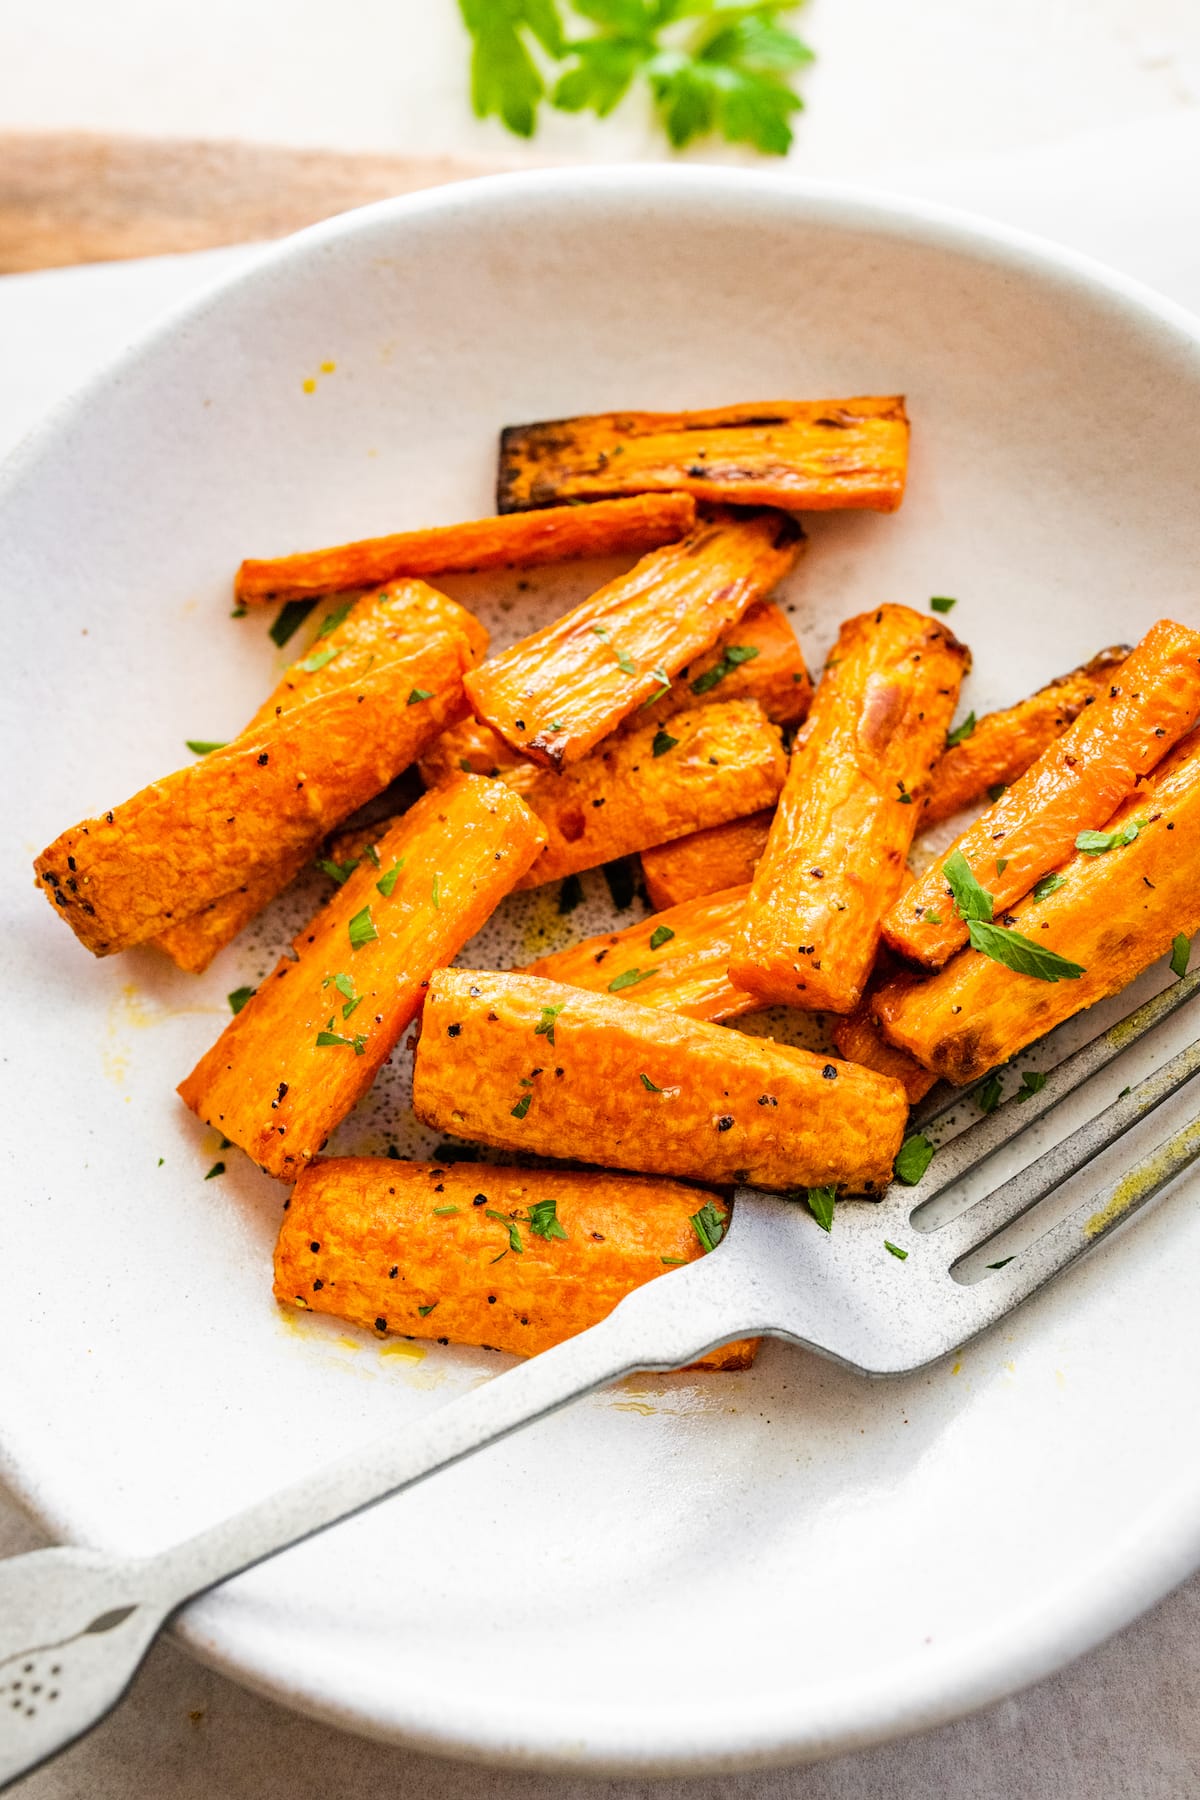 Air fried carrots cut into matchsticks on a plate and garnished with fresh herbs.